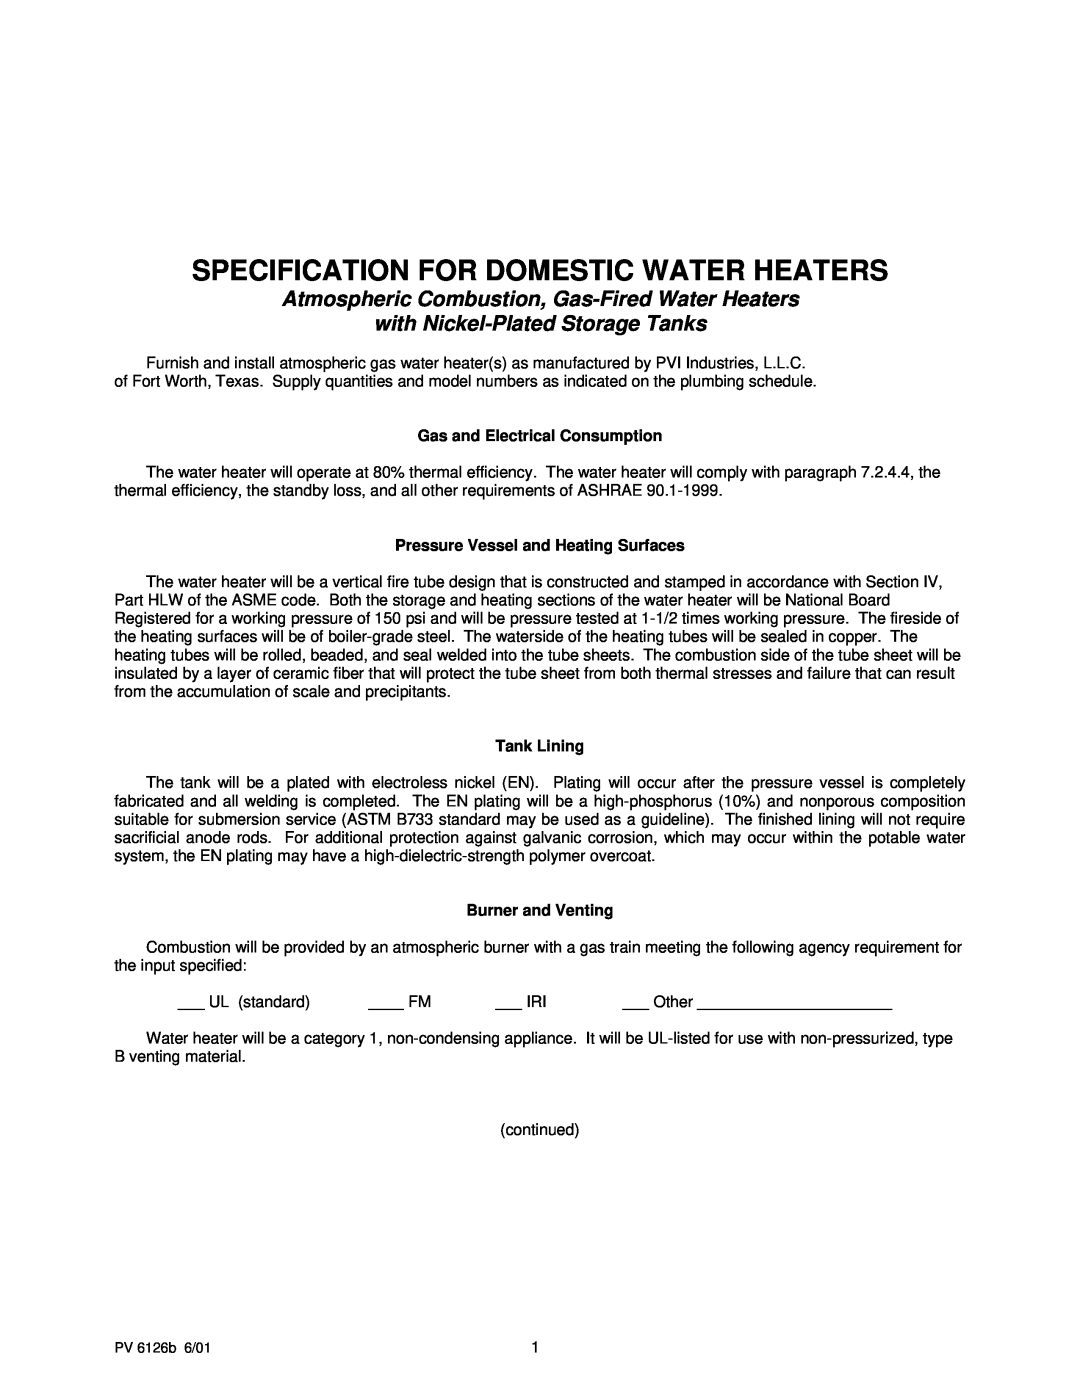 PVI Industries PV 6126b manual Specification For Domestic Water Heaters, Atmospheric Combustion, Gas-FiredWater Heaters 